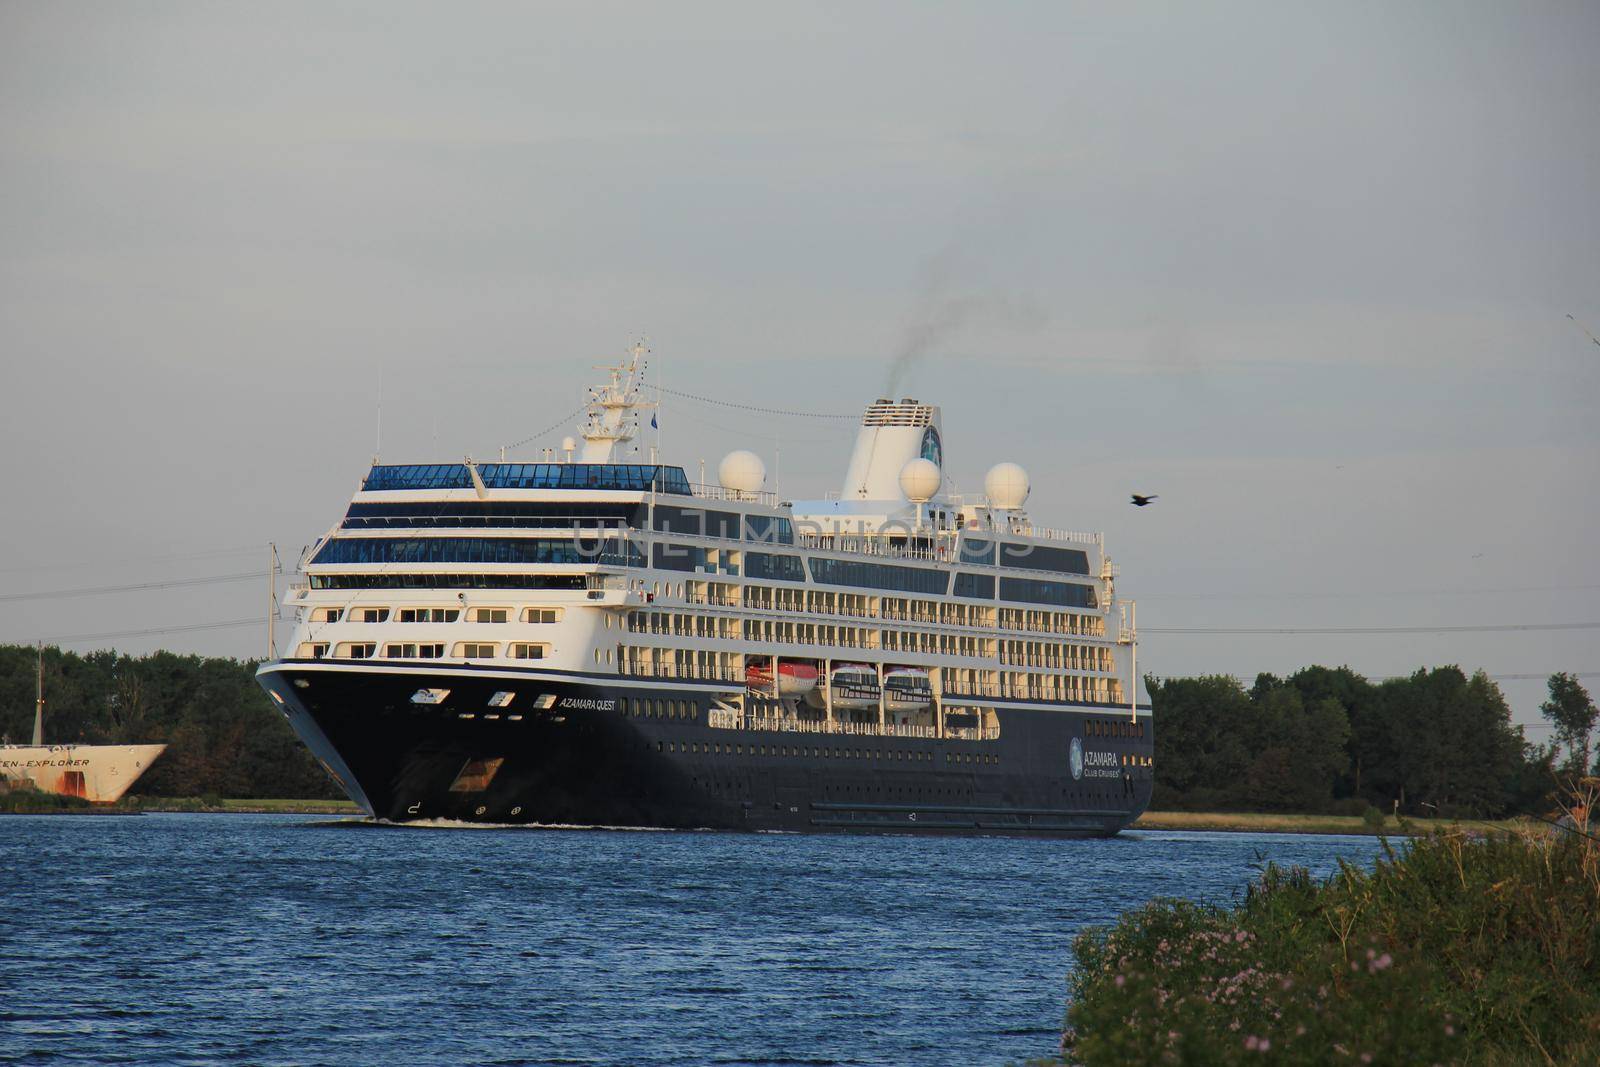 Velsen, The Netherlands - August, 27th 2016: Azamara Quest a cruise ship owned and operated by Azamara Club Cruises on North Sea Canal